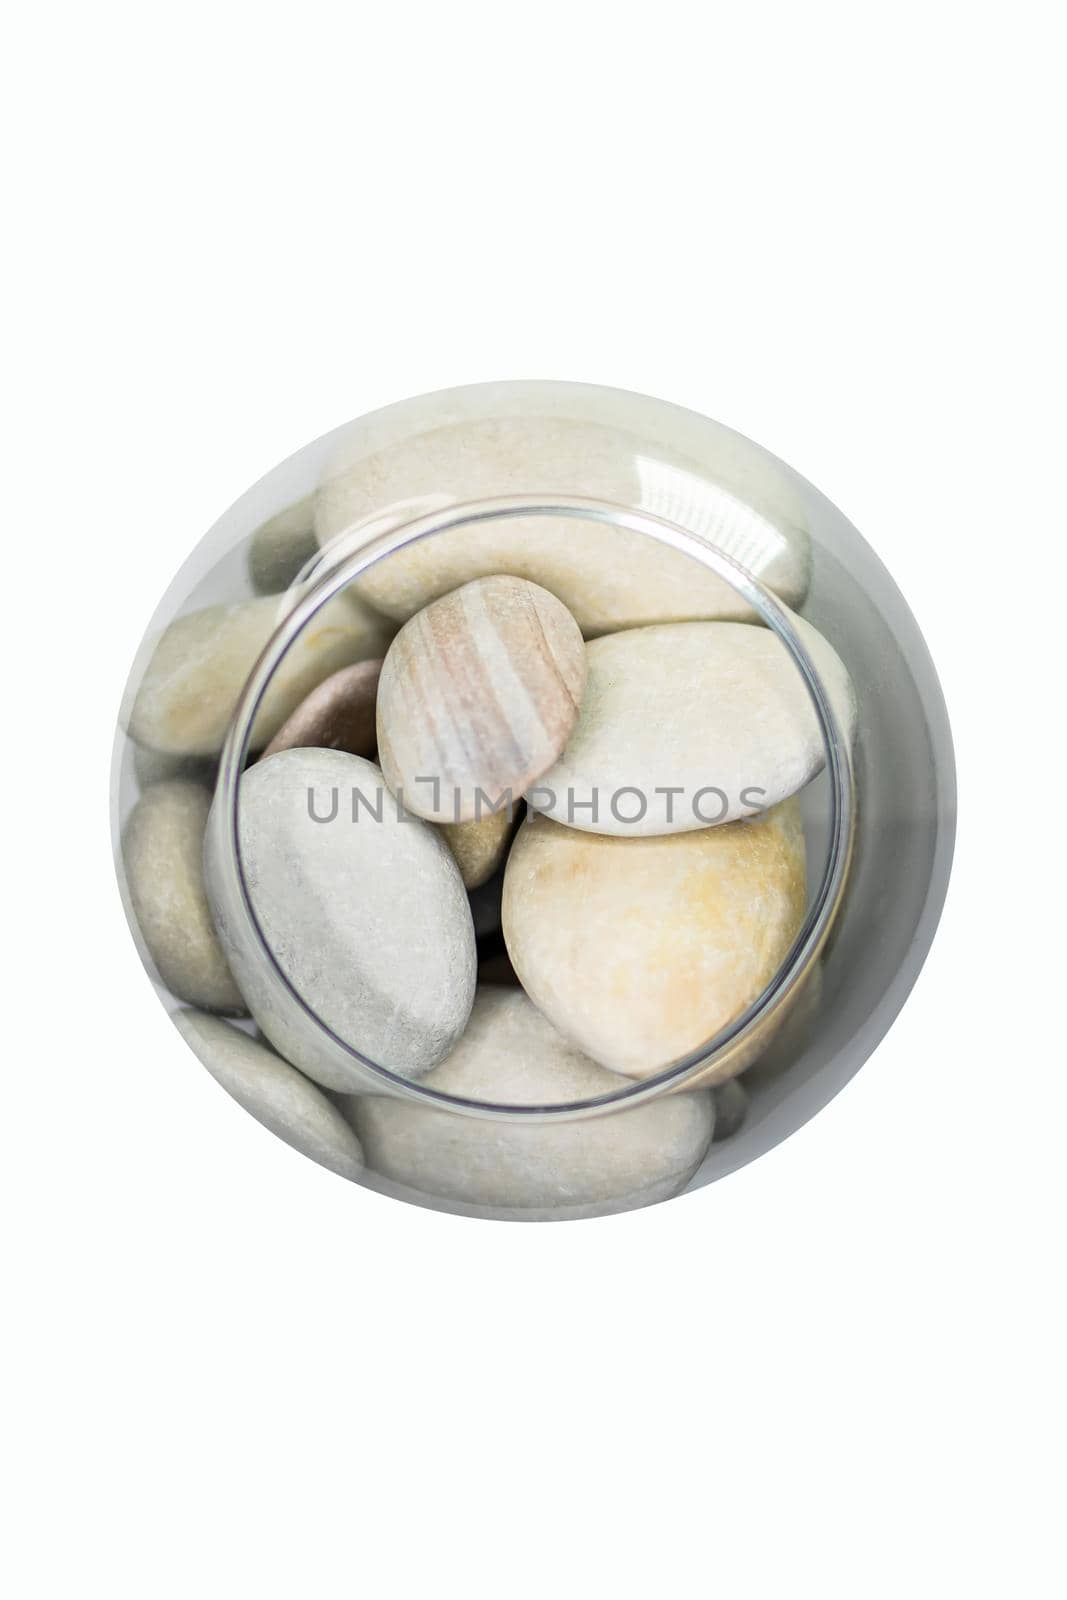 beautiful sea stones in a small aquarium on a white background top view.